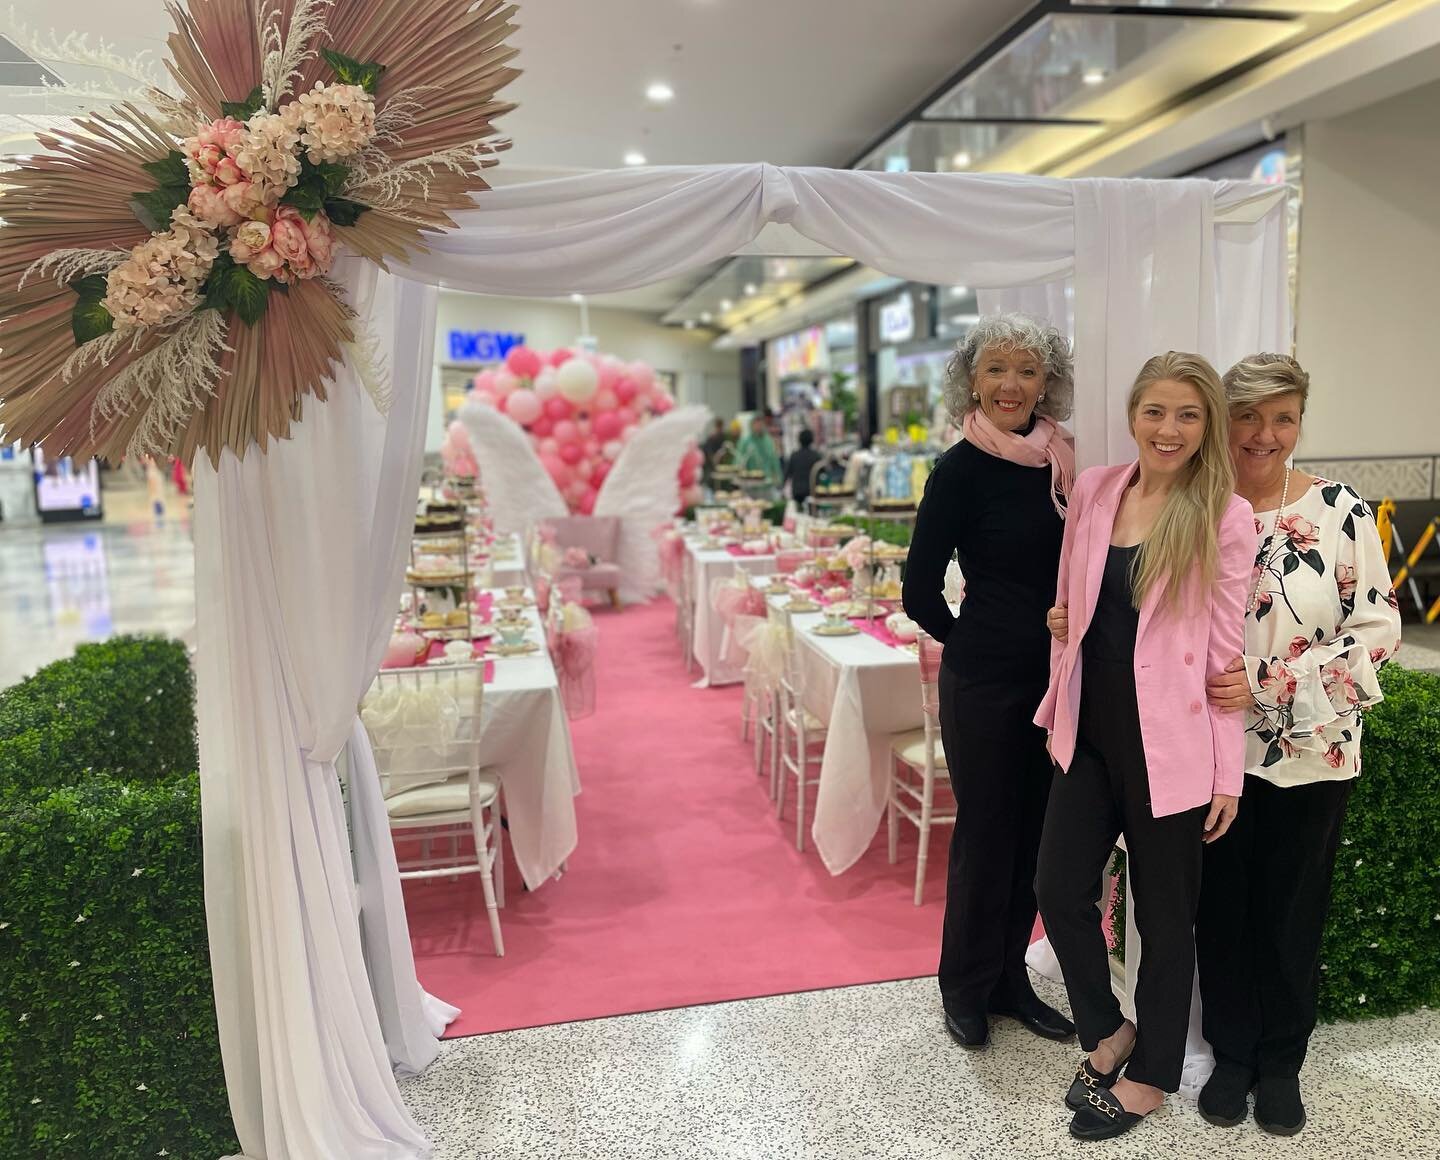 We loved bringing to life @bonnyriggplaza&rsquo;s Mother&rsquo;s Day high tea and floral workshops today raising funds for the @mcgrathfoundation. 🌸💐💕
.
.
.
.
.
🧠: Install, VM, design &amp; activation @mark_edmonds_productions 
🎈: @lyssnatalie @